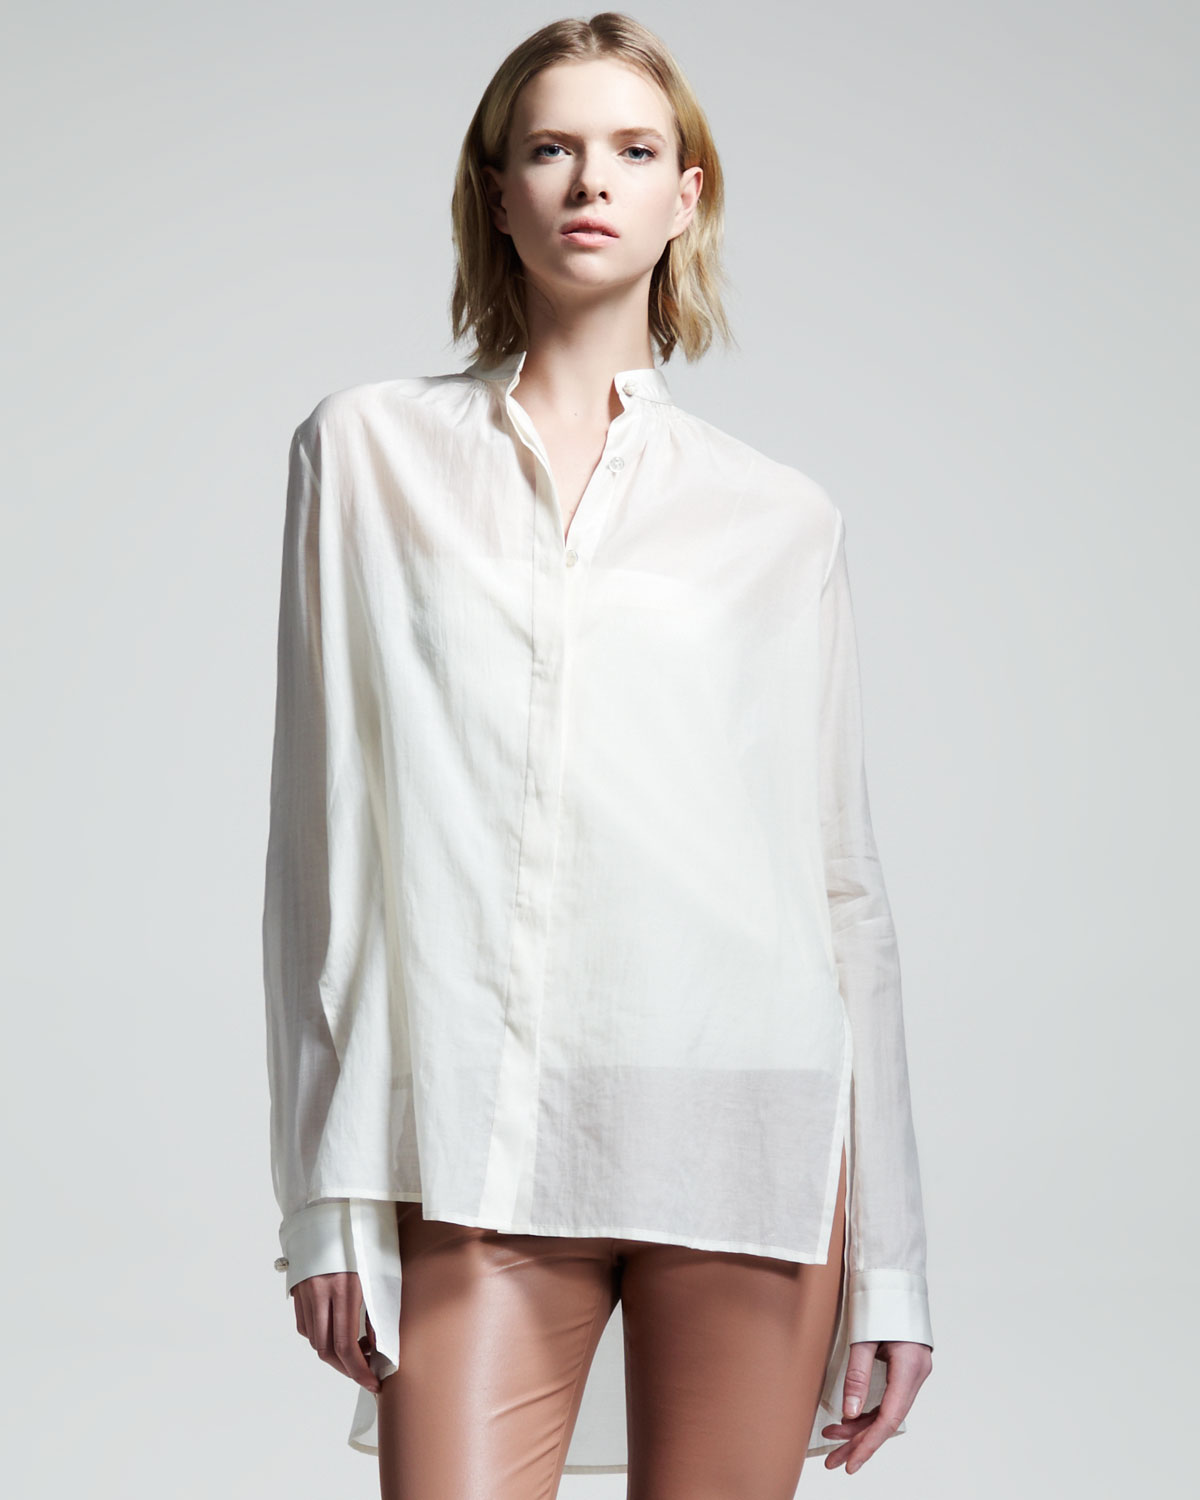 Lyst - The row Voile Blouse in White